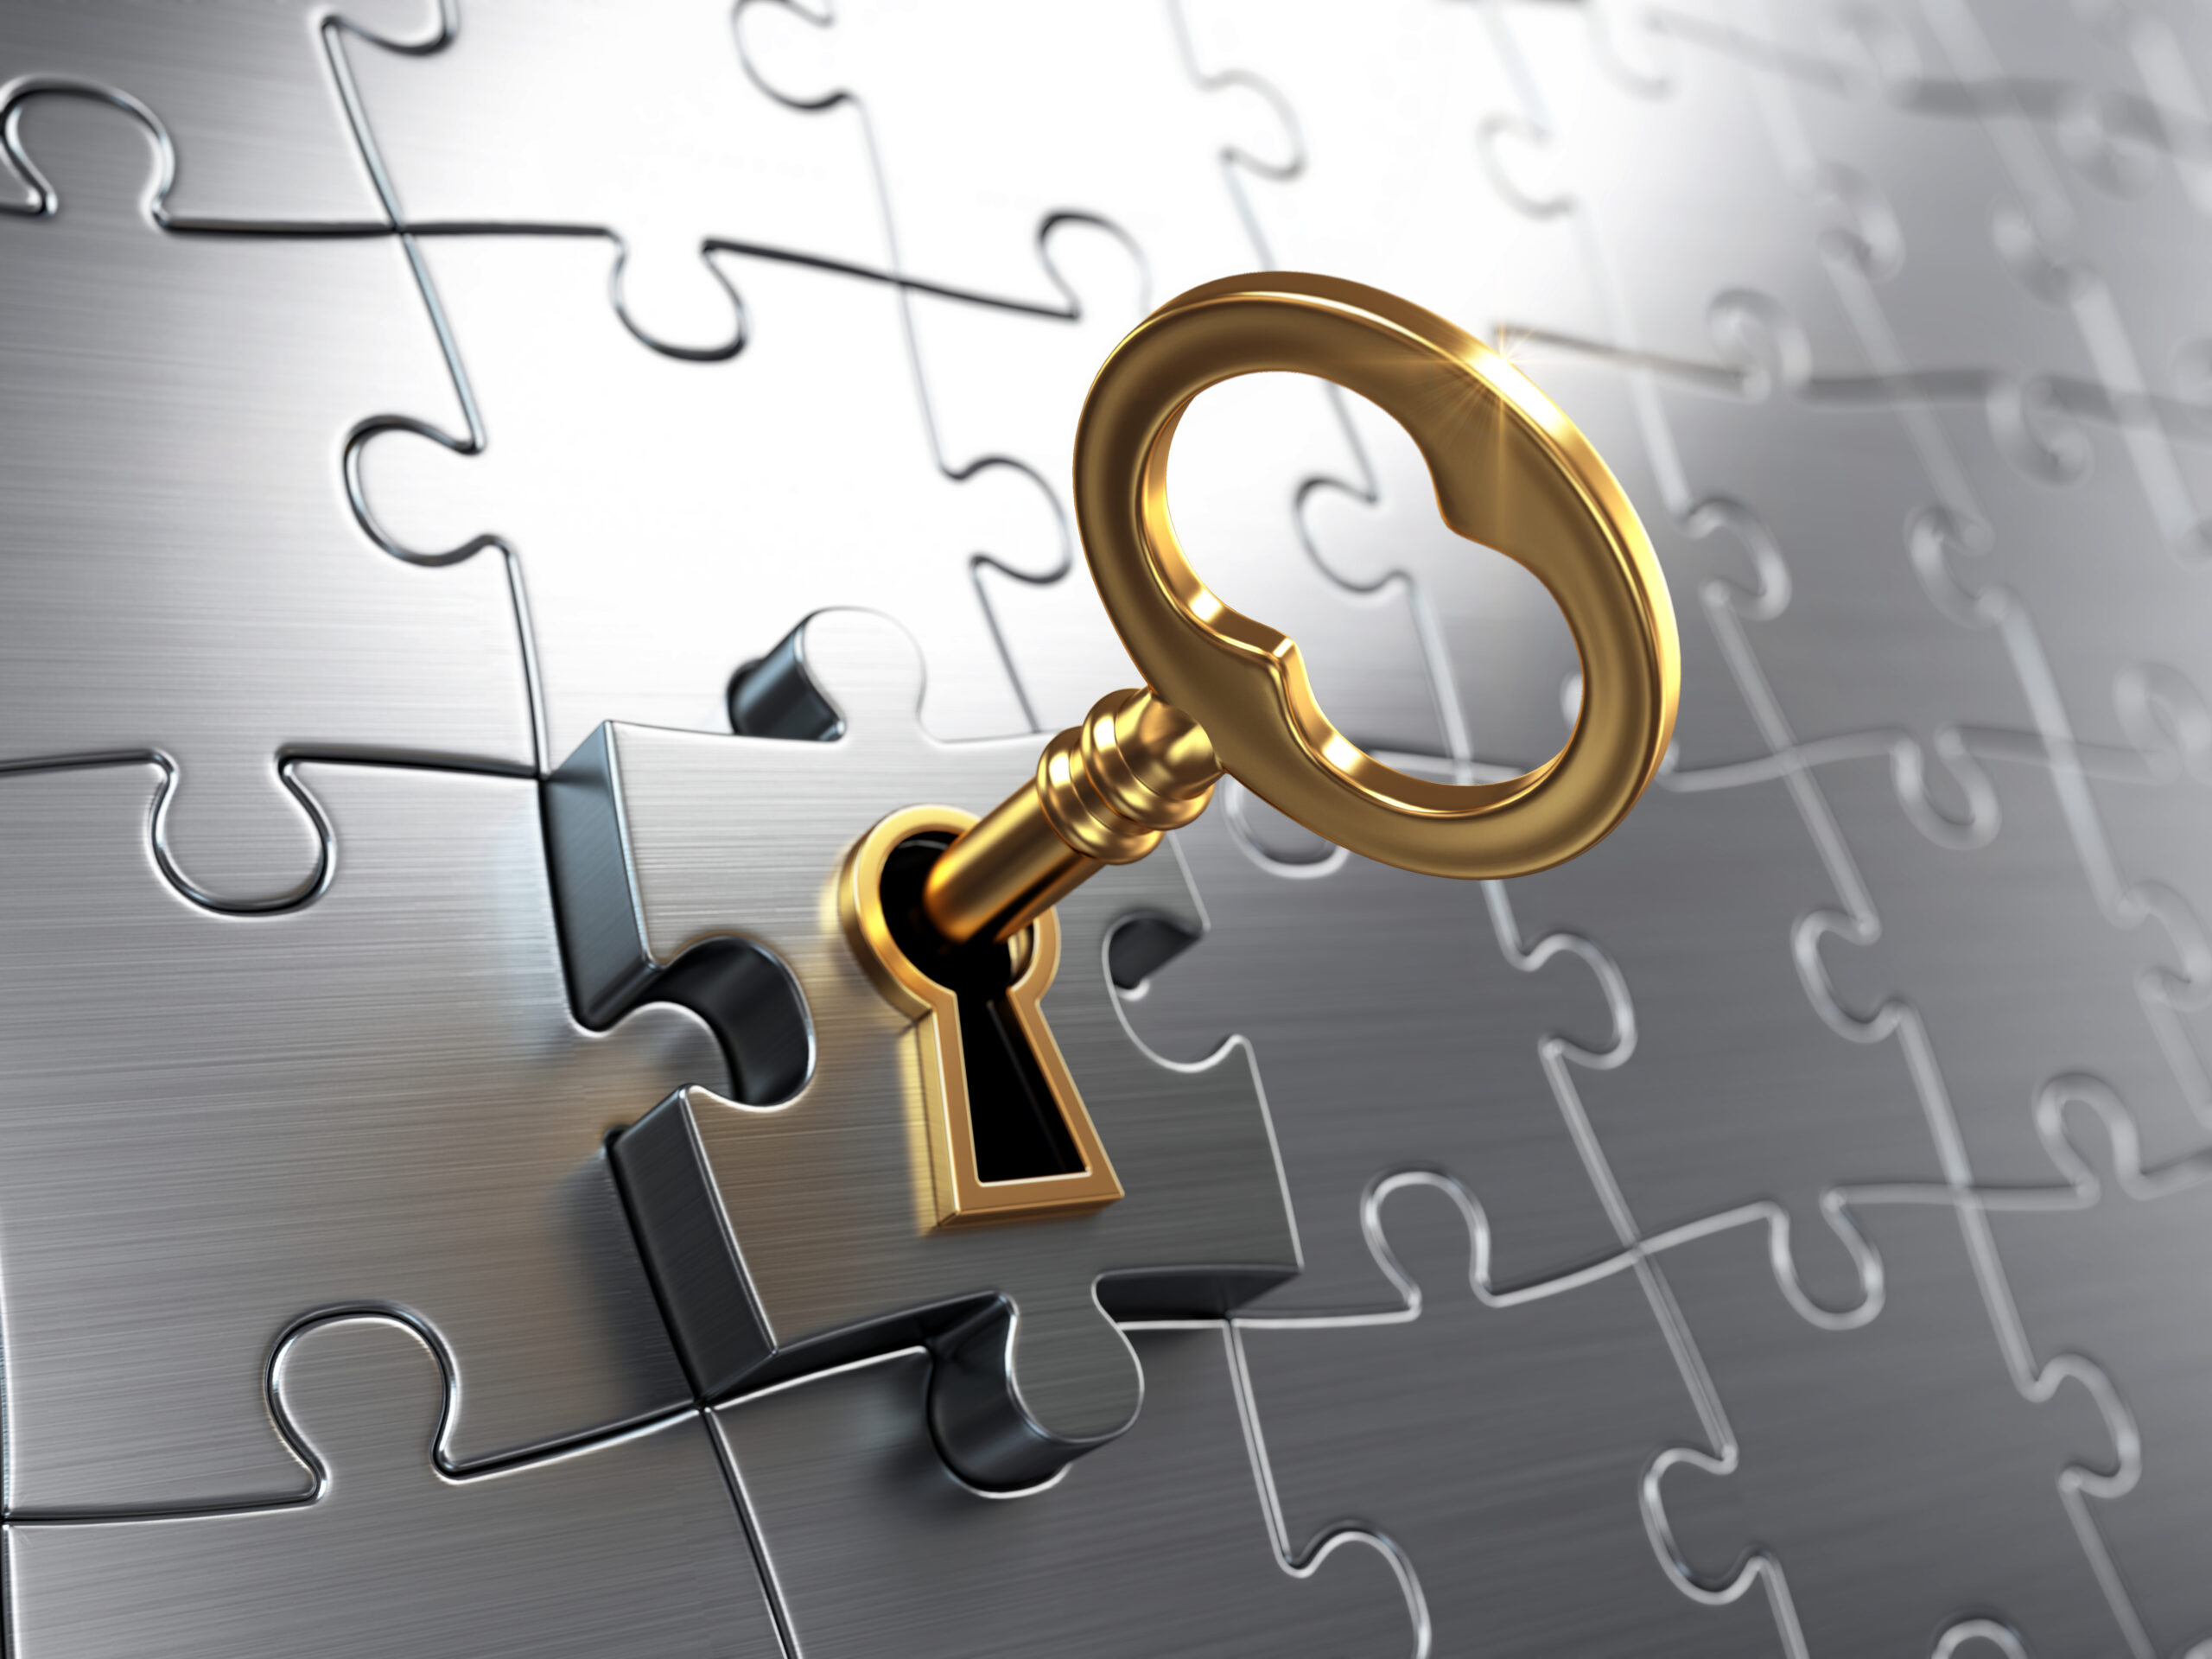 Do You Know the Keys to Unlocking Team and Leadership Effectiveness?